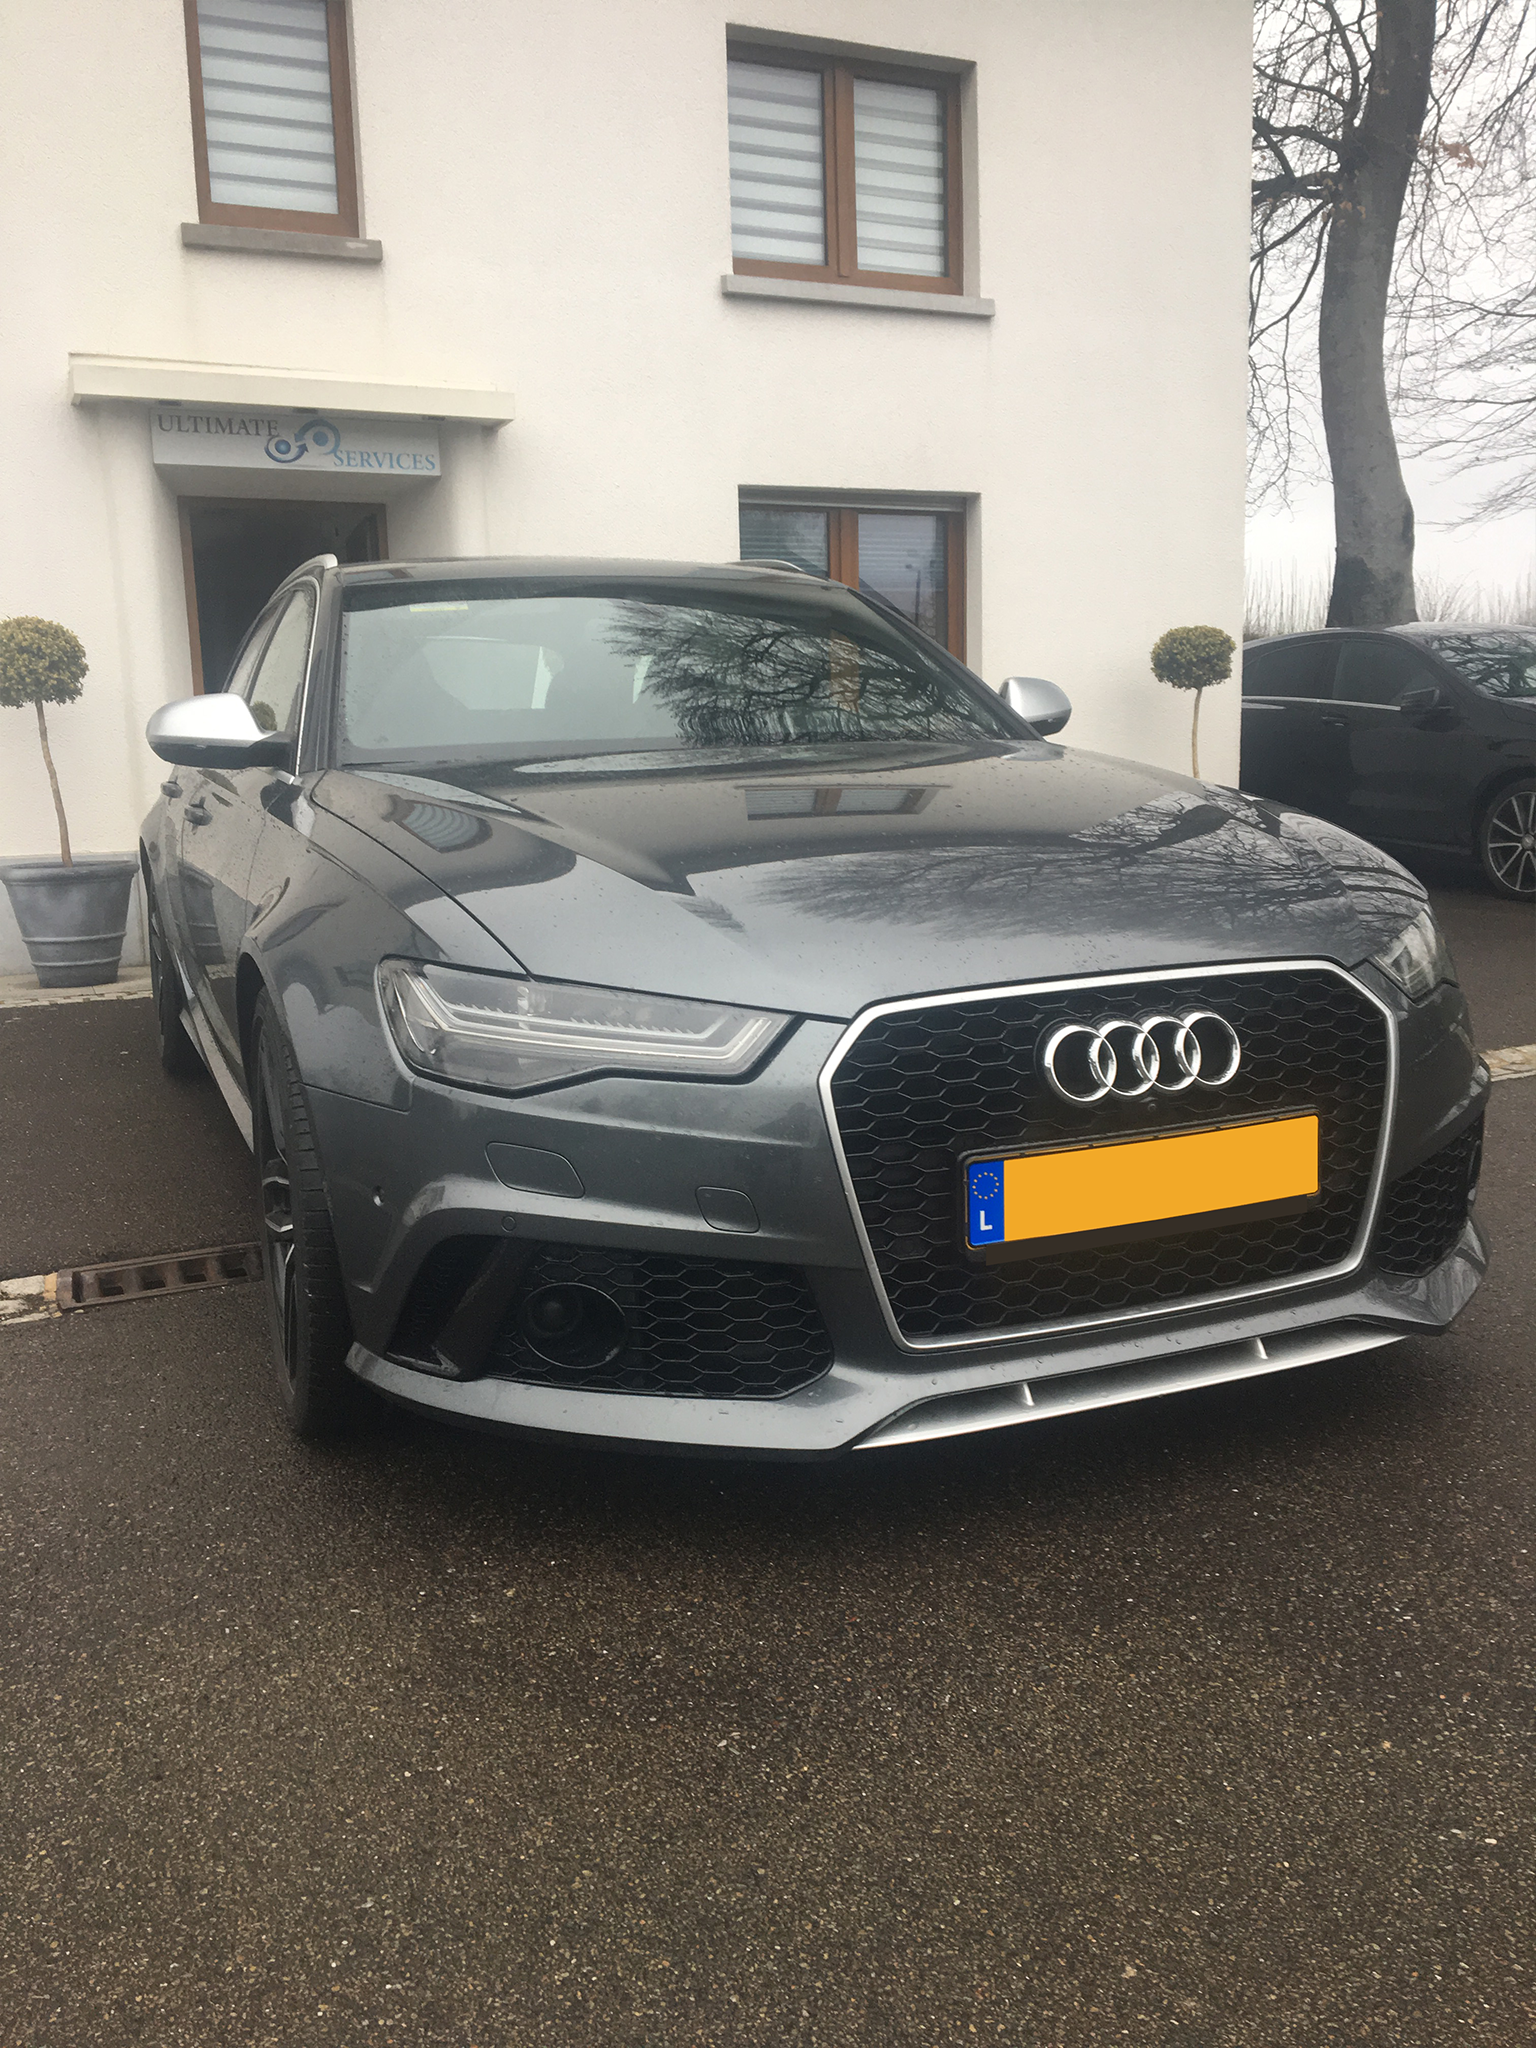 Luxembourg Location Audi Ultimate Services